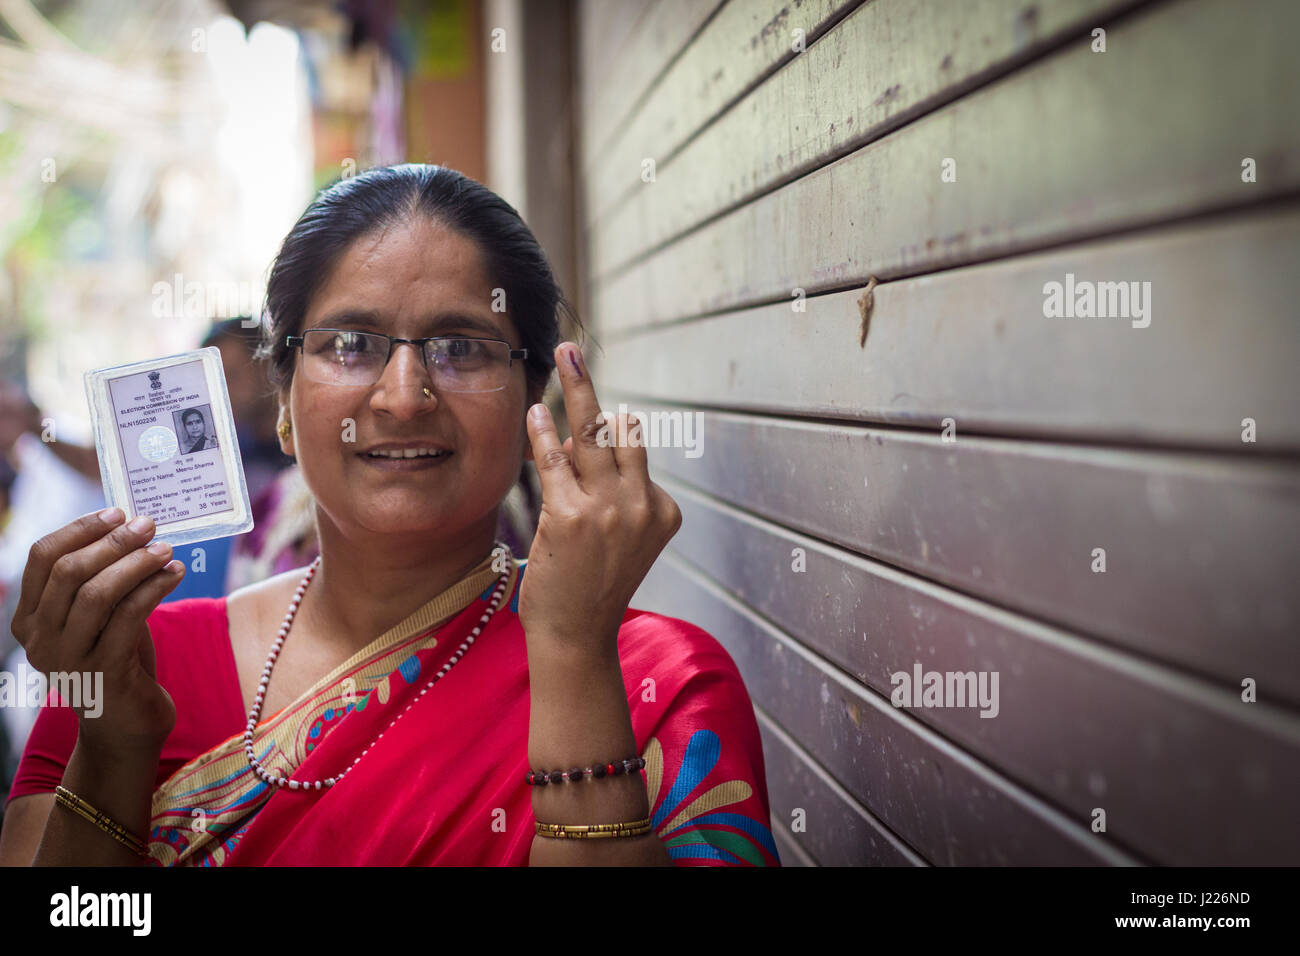 New Delhi - APRIL 23, 2017: New Delhi elections 2017 A woman shows her ink stained index finger after casting her vote for the MCD elections 2017. Stock Photo